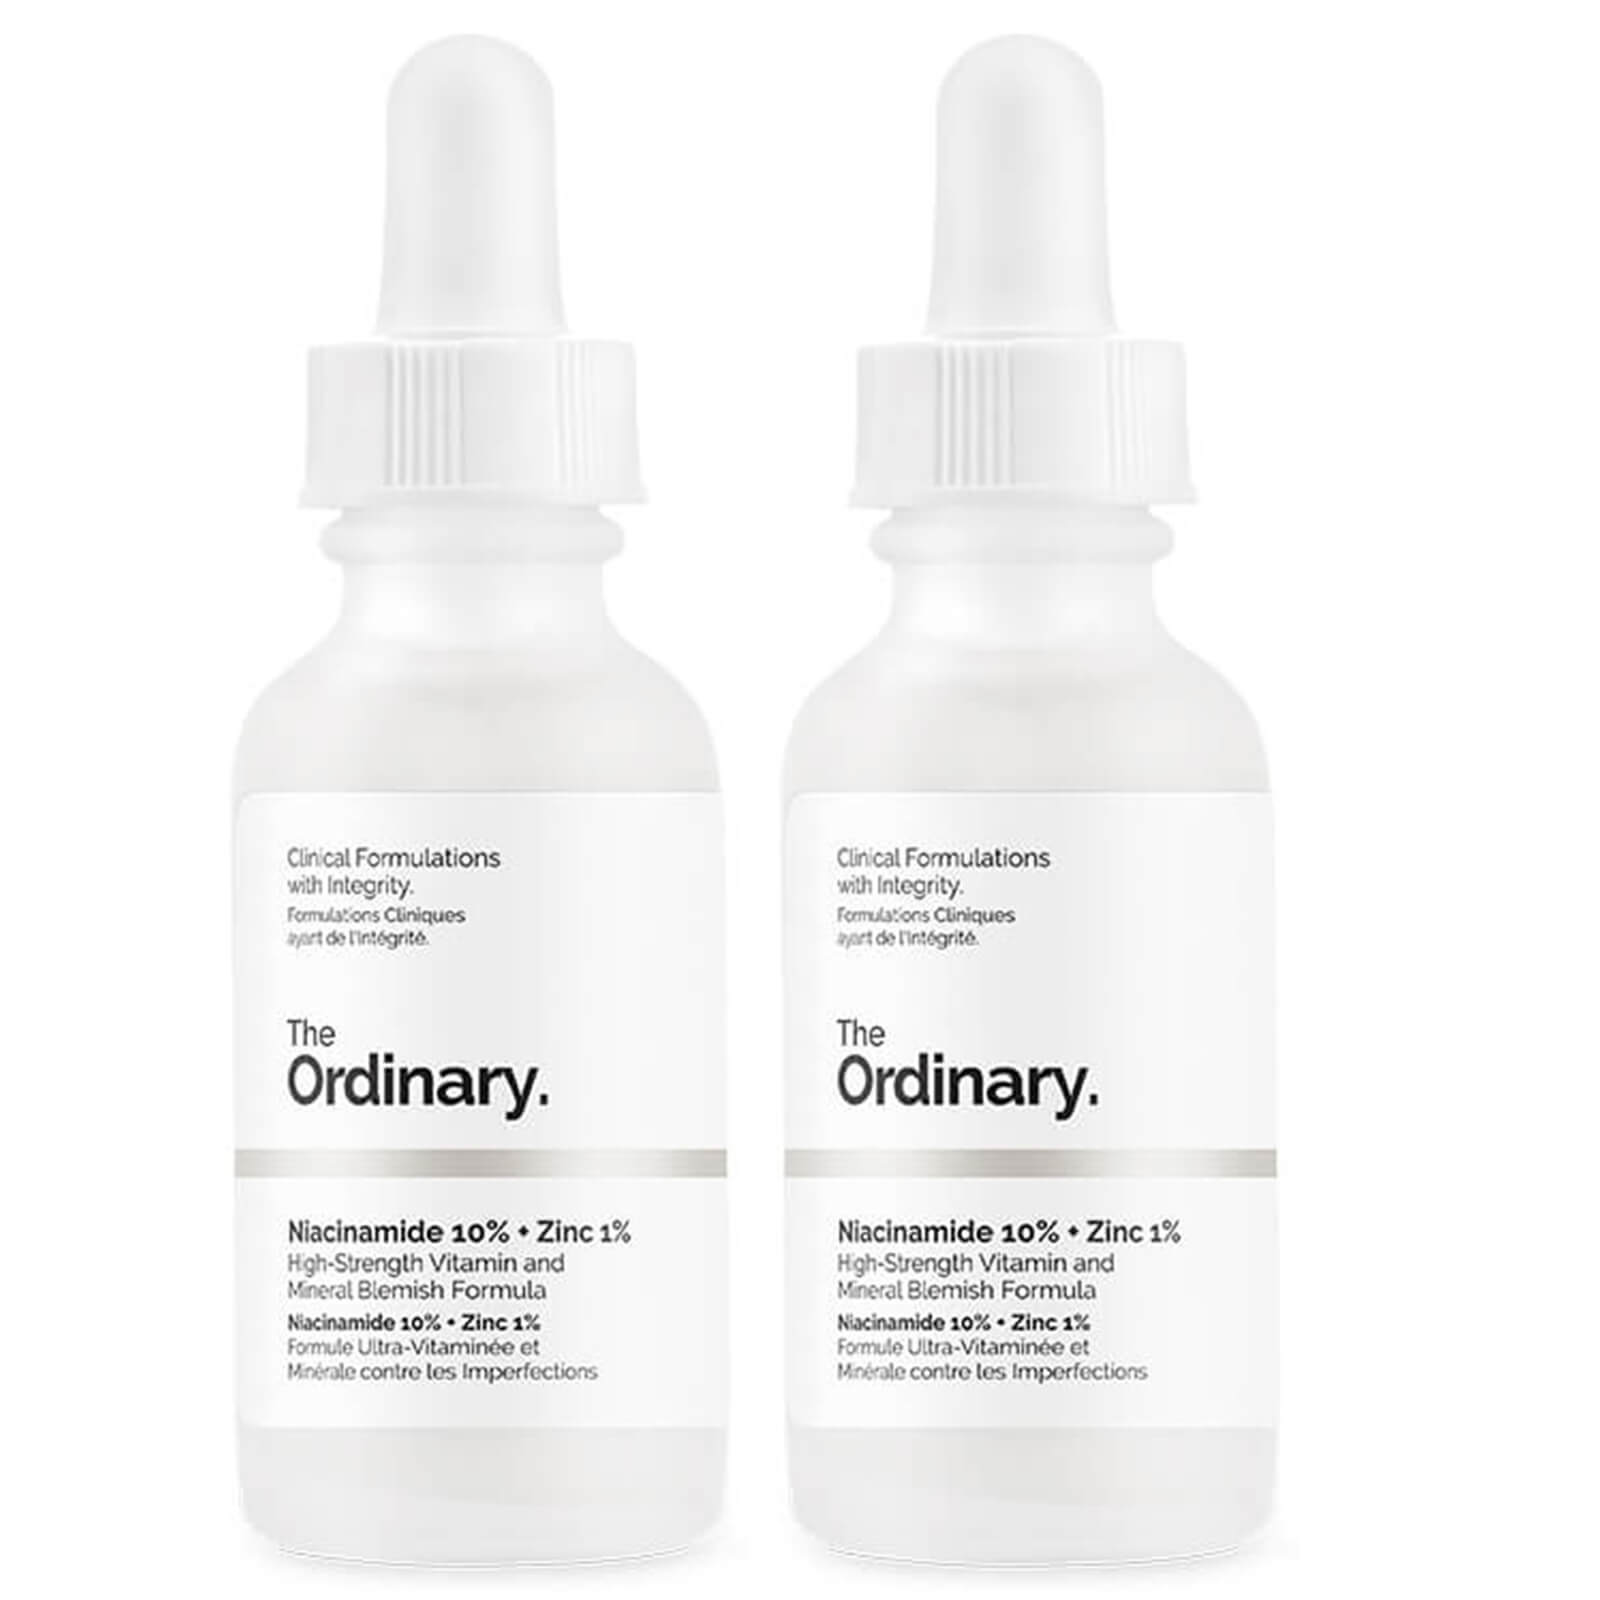 The Ordinary Niacinamide 10% + Zinc 1% High Strength Vitamin and Mineral Blemish Formula Duo